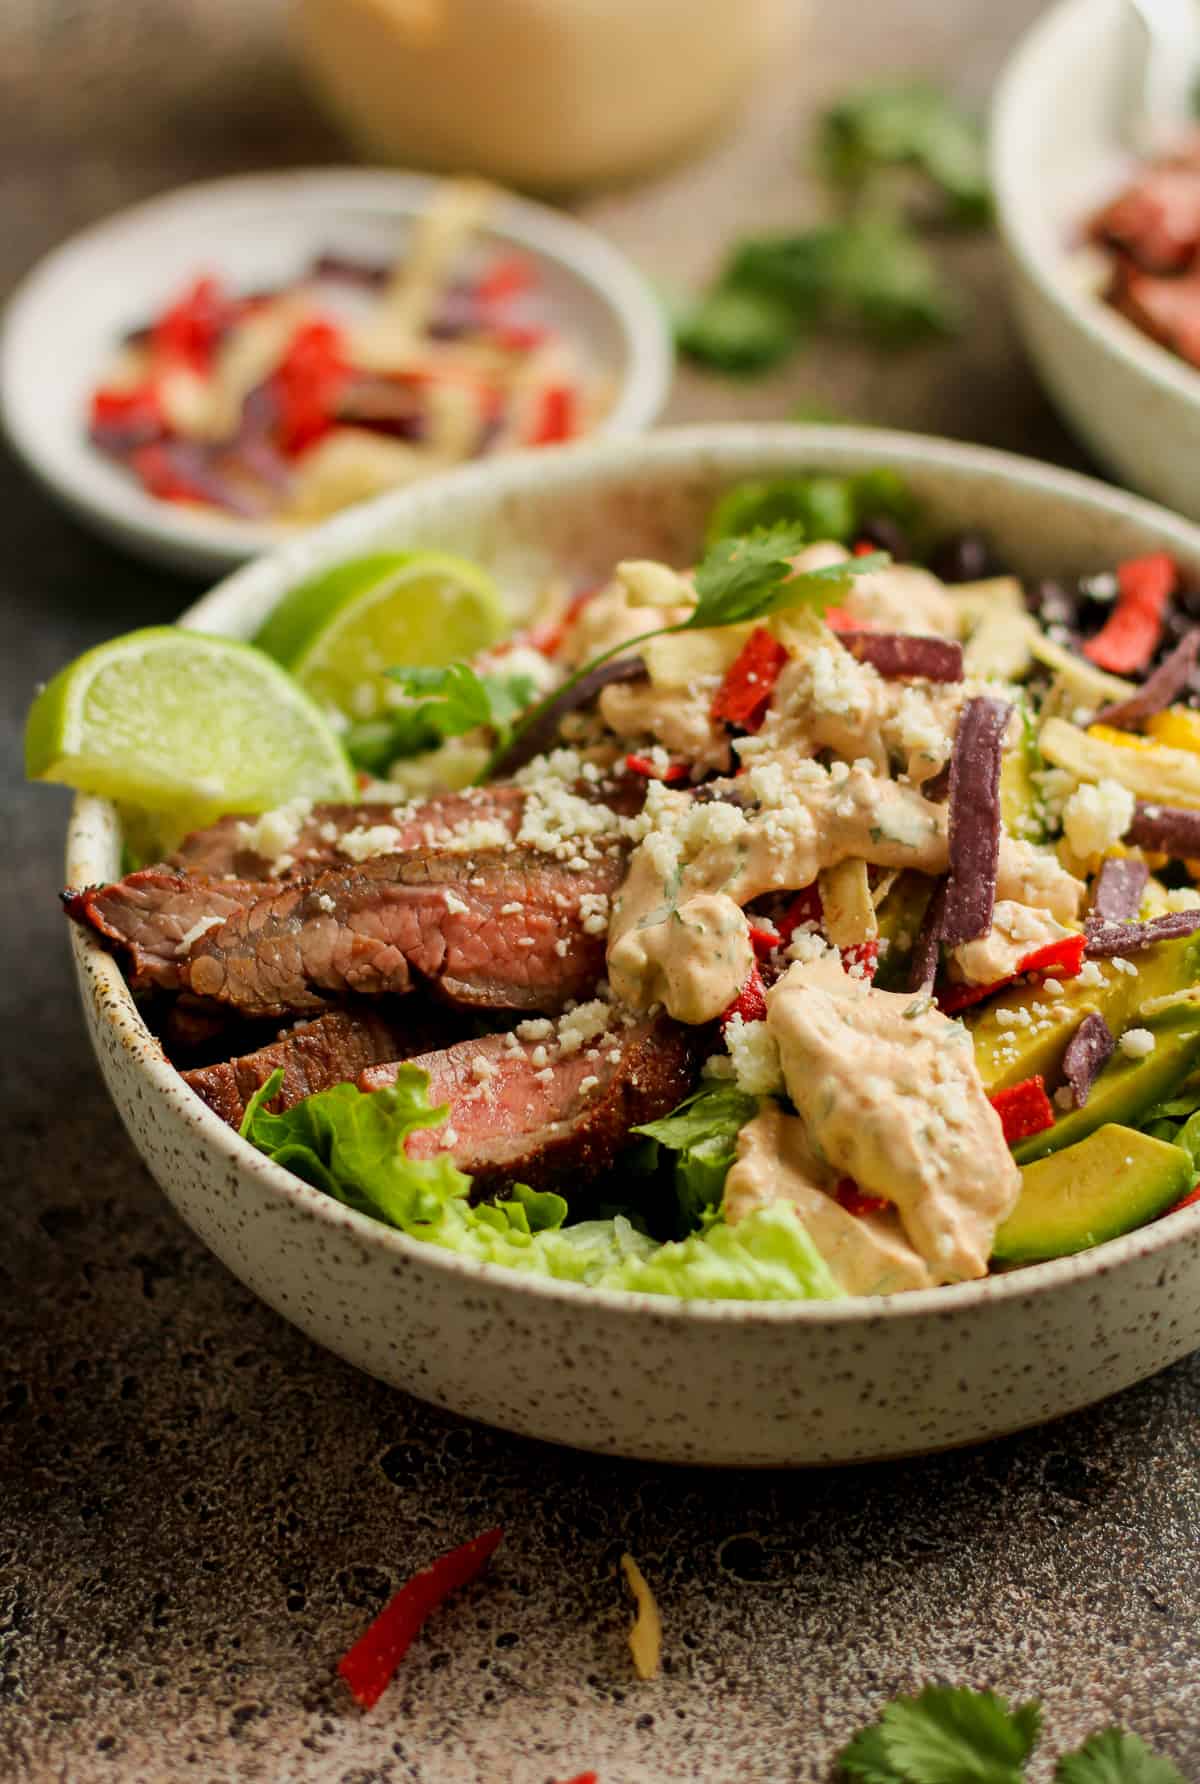 Side view of a fajita steak taco salad with chipotle ranch.